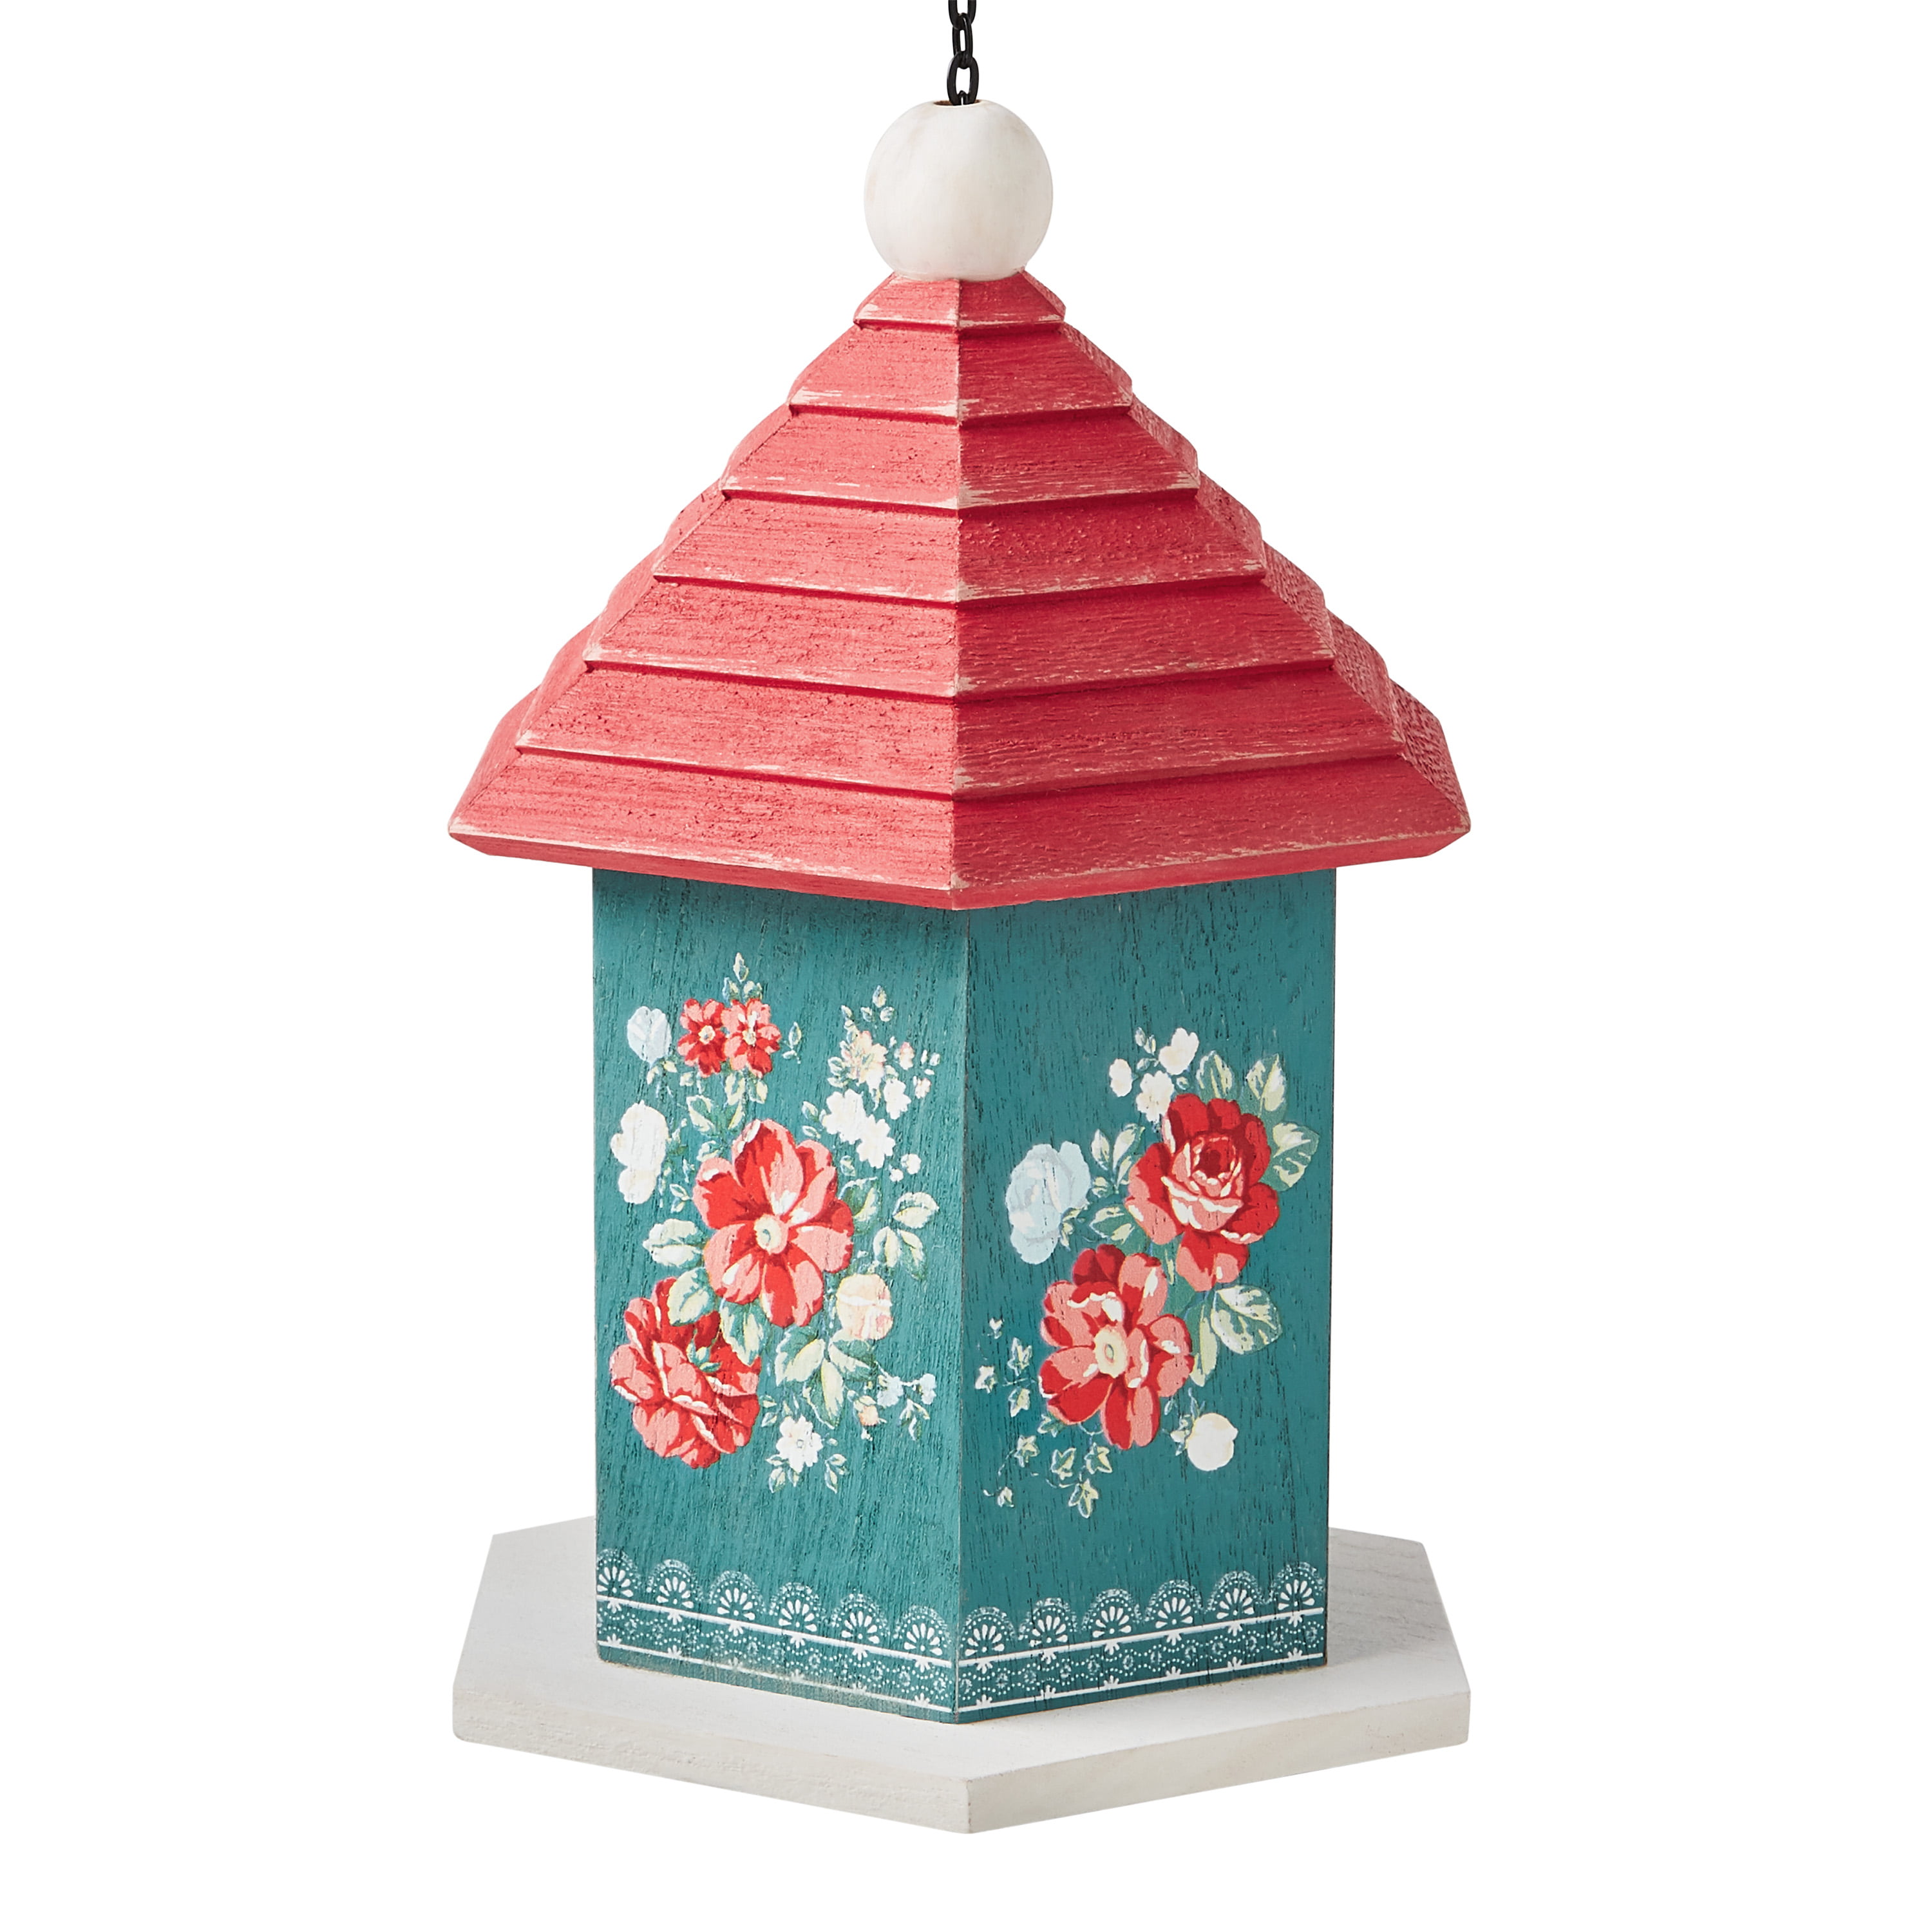 Bird House Green Floral NEW wood with sparkles on roof 